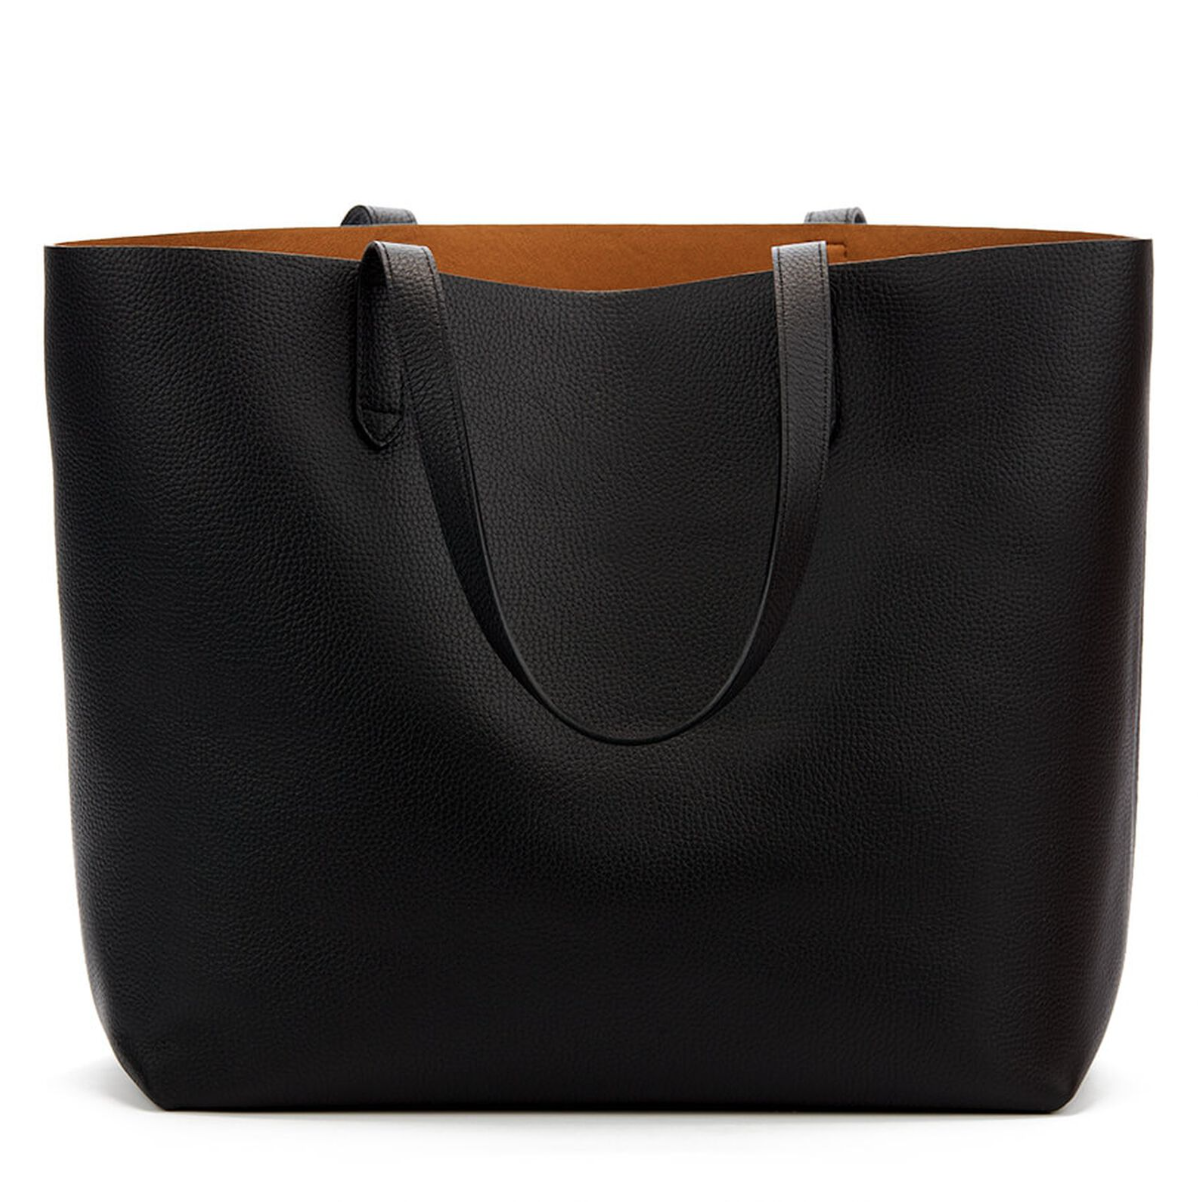 Classic Structured Tote